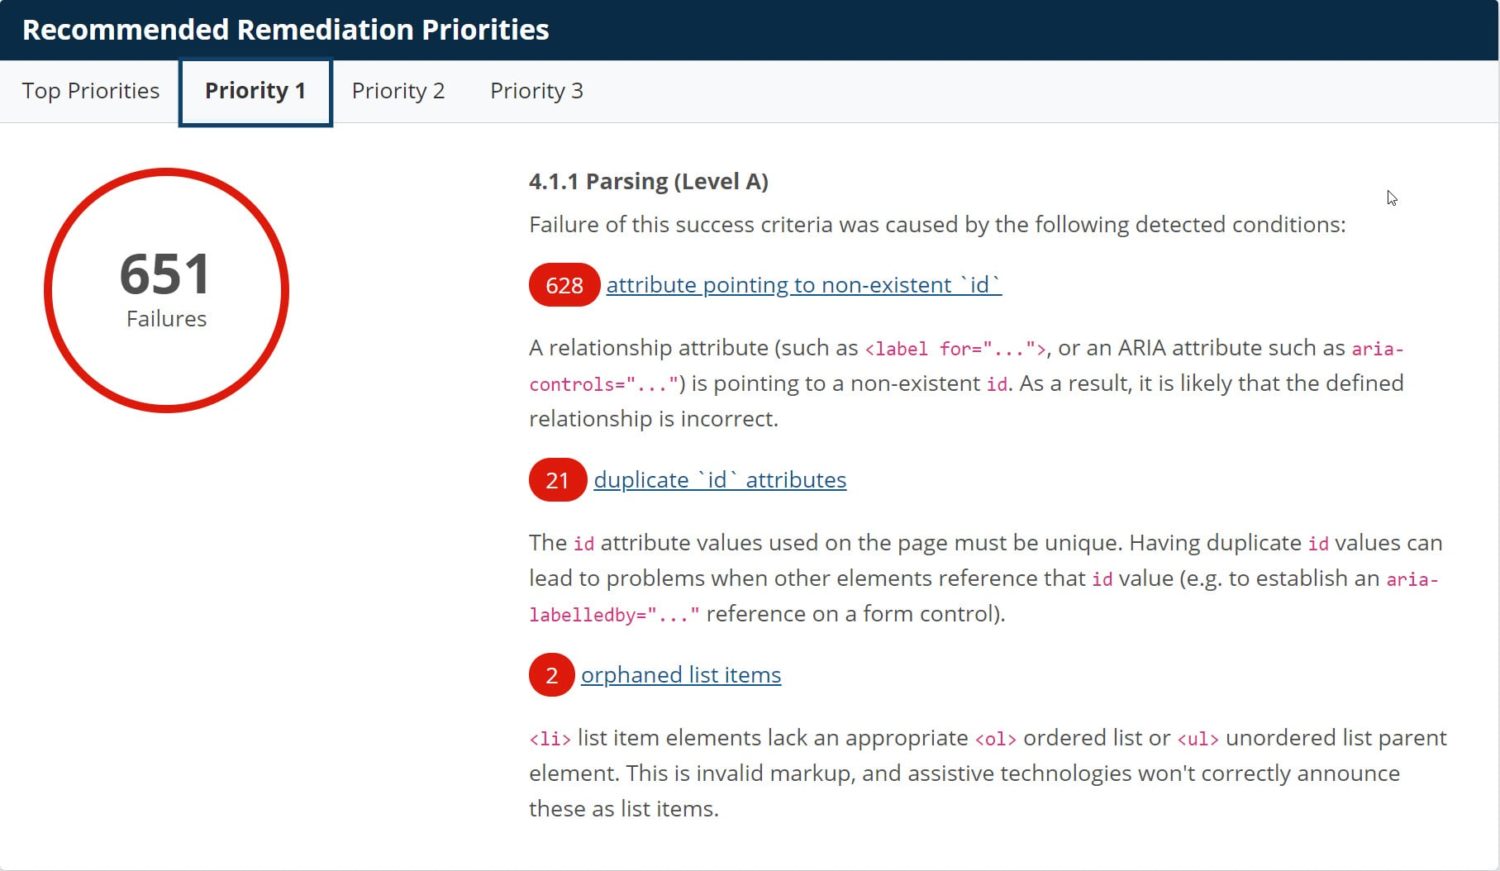 ARC screenshot of recommended remediation priority 1 report shows 628 failures of 4.1.1